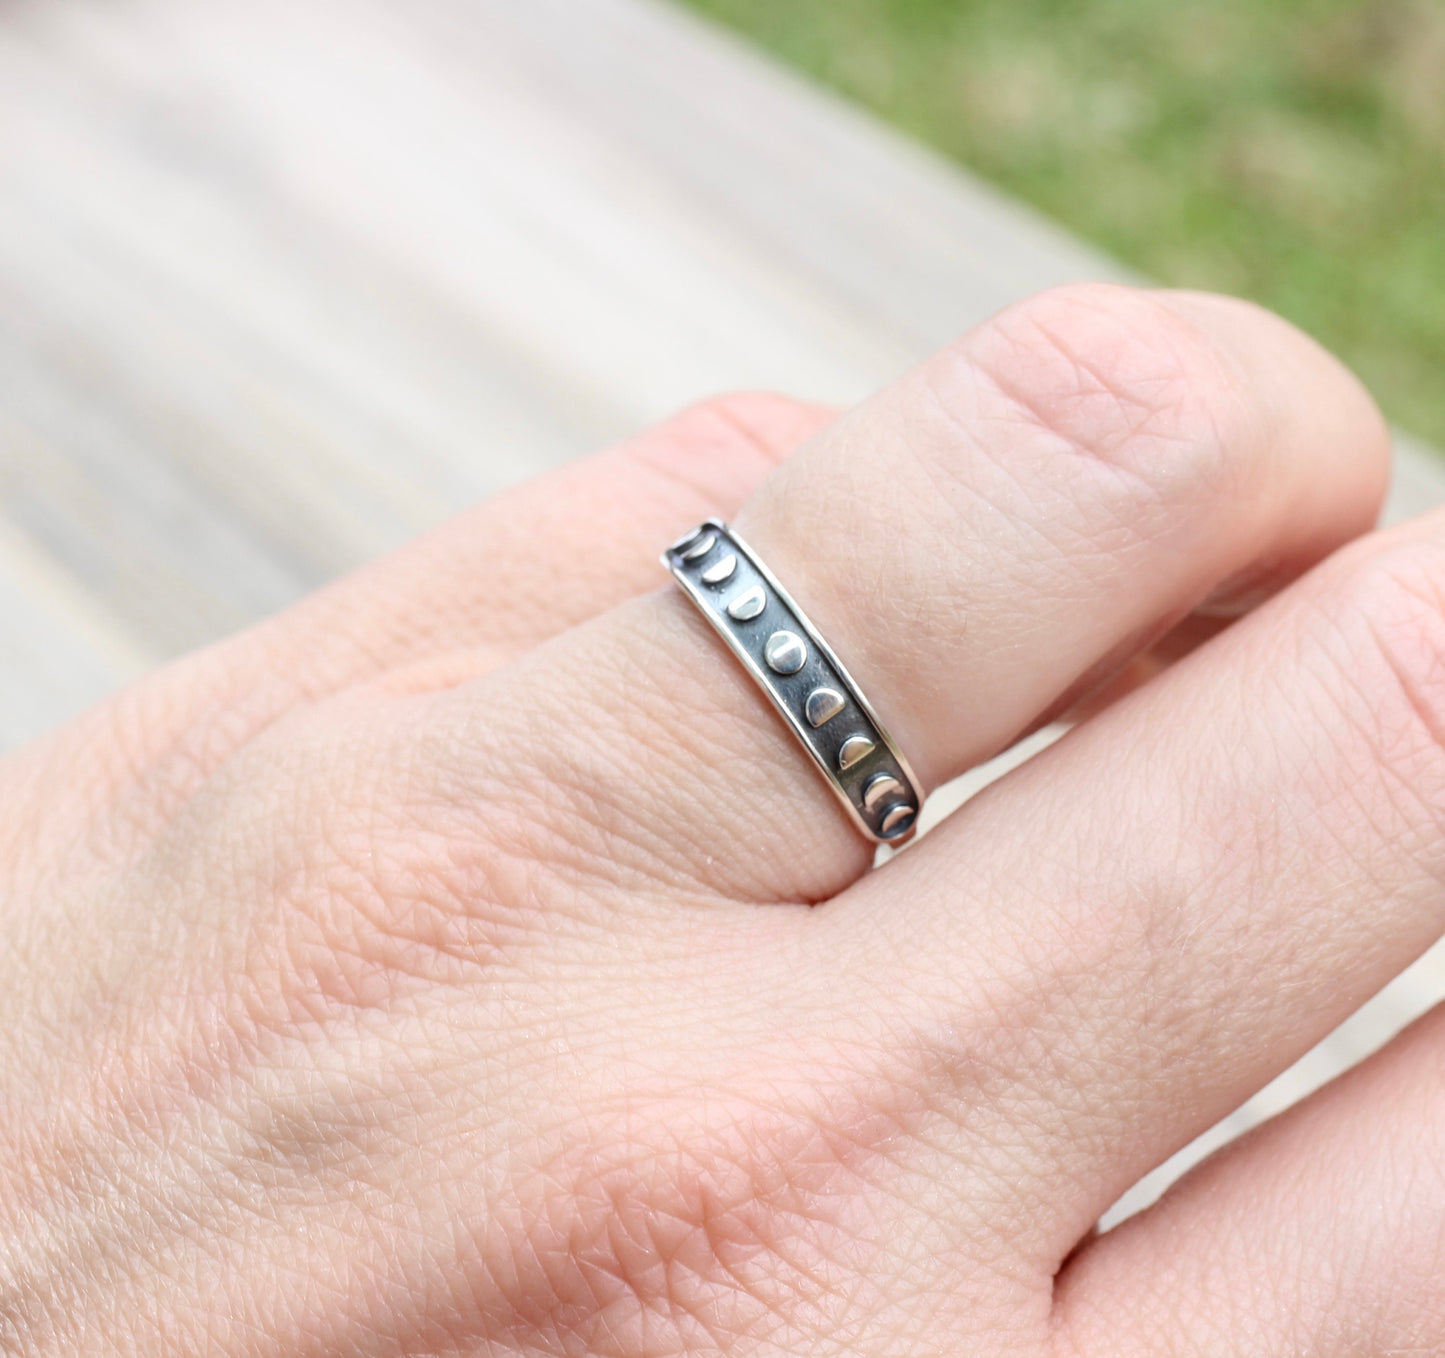 Sterling Silver Moon Phase Ring // Personalized Ring with Custom Inside Engraving - Custom Stacking Ring - Engraved Ring